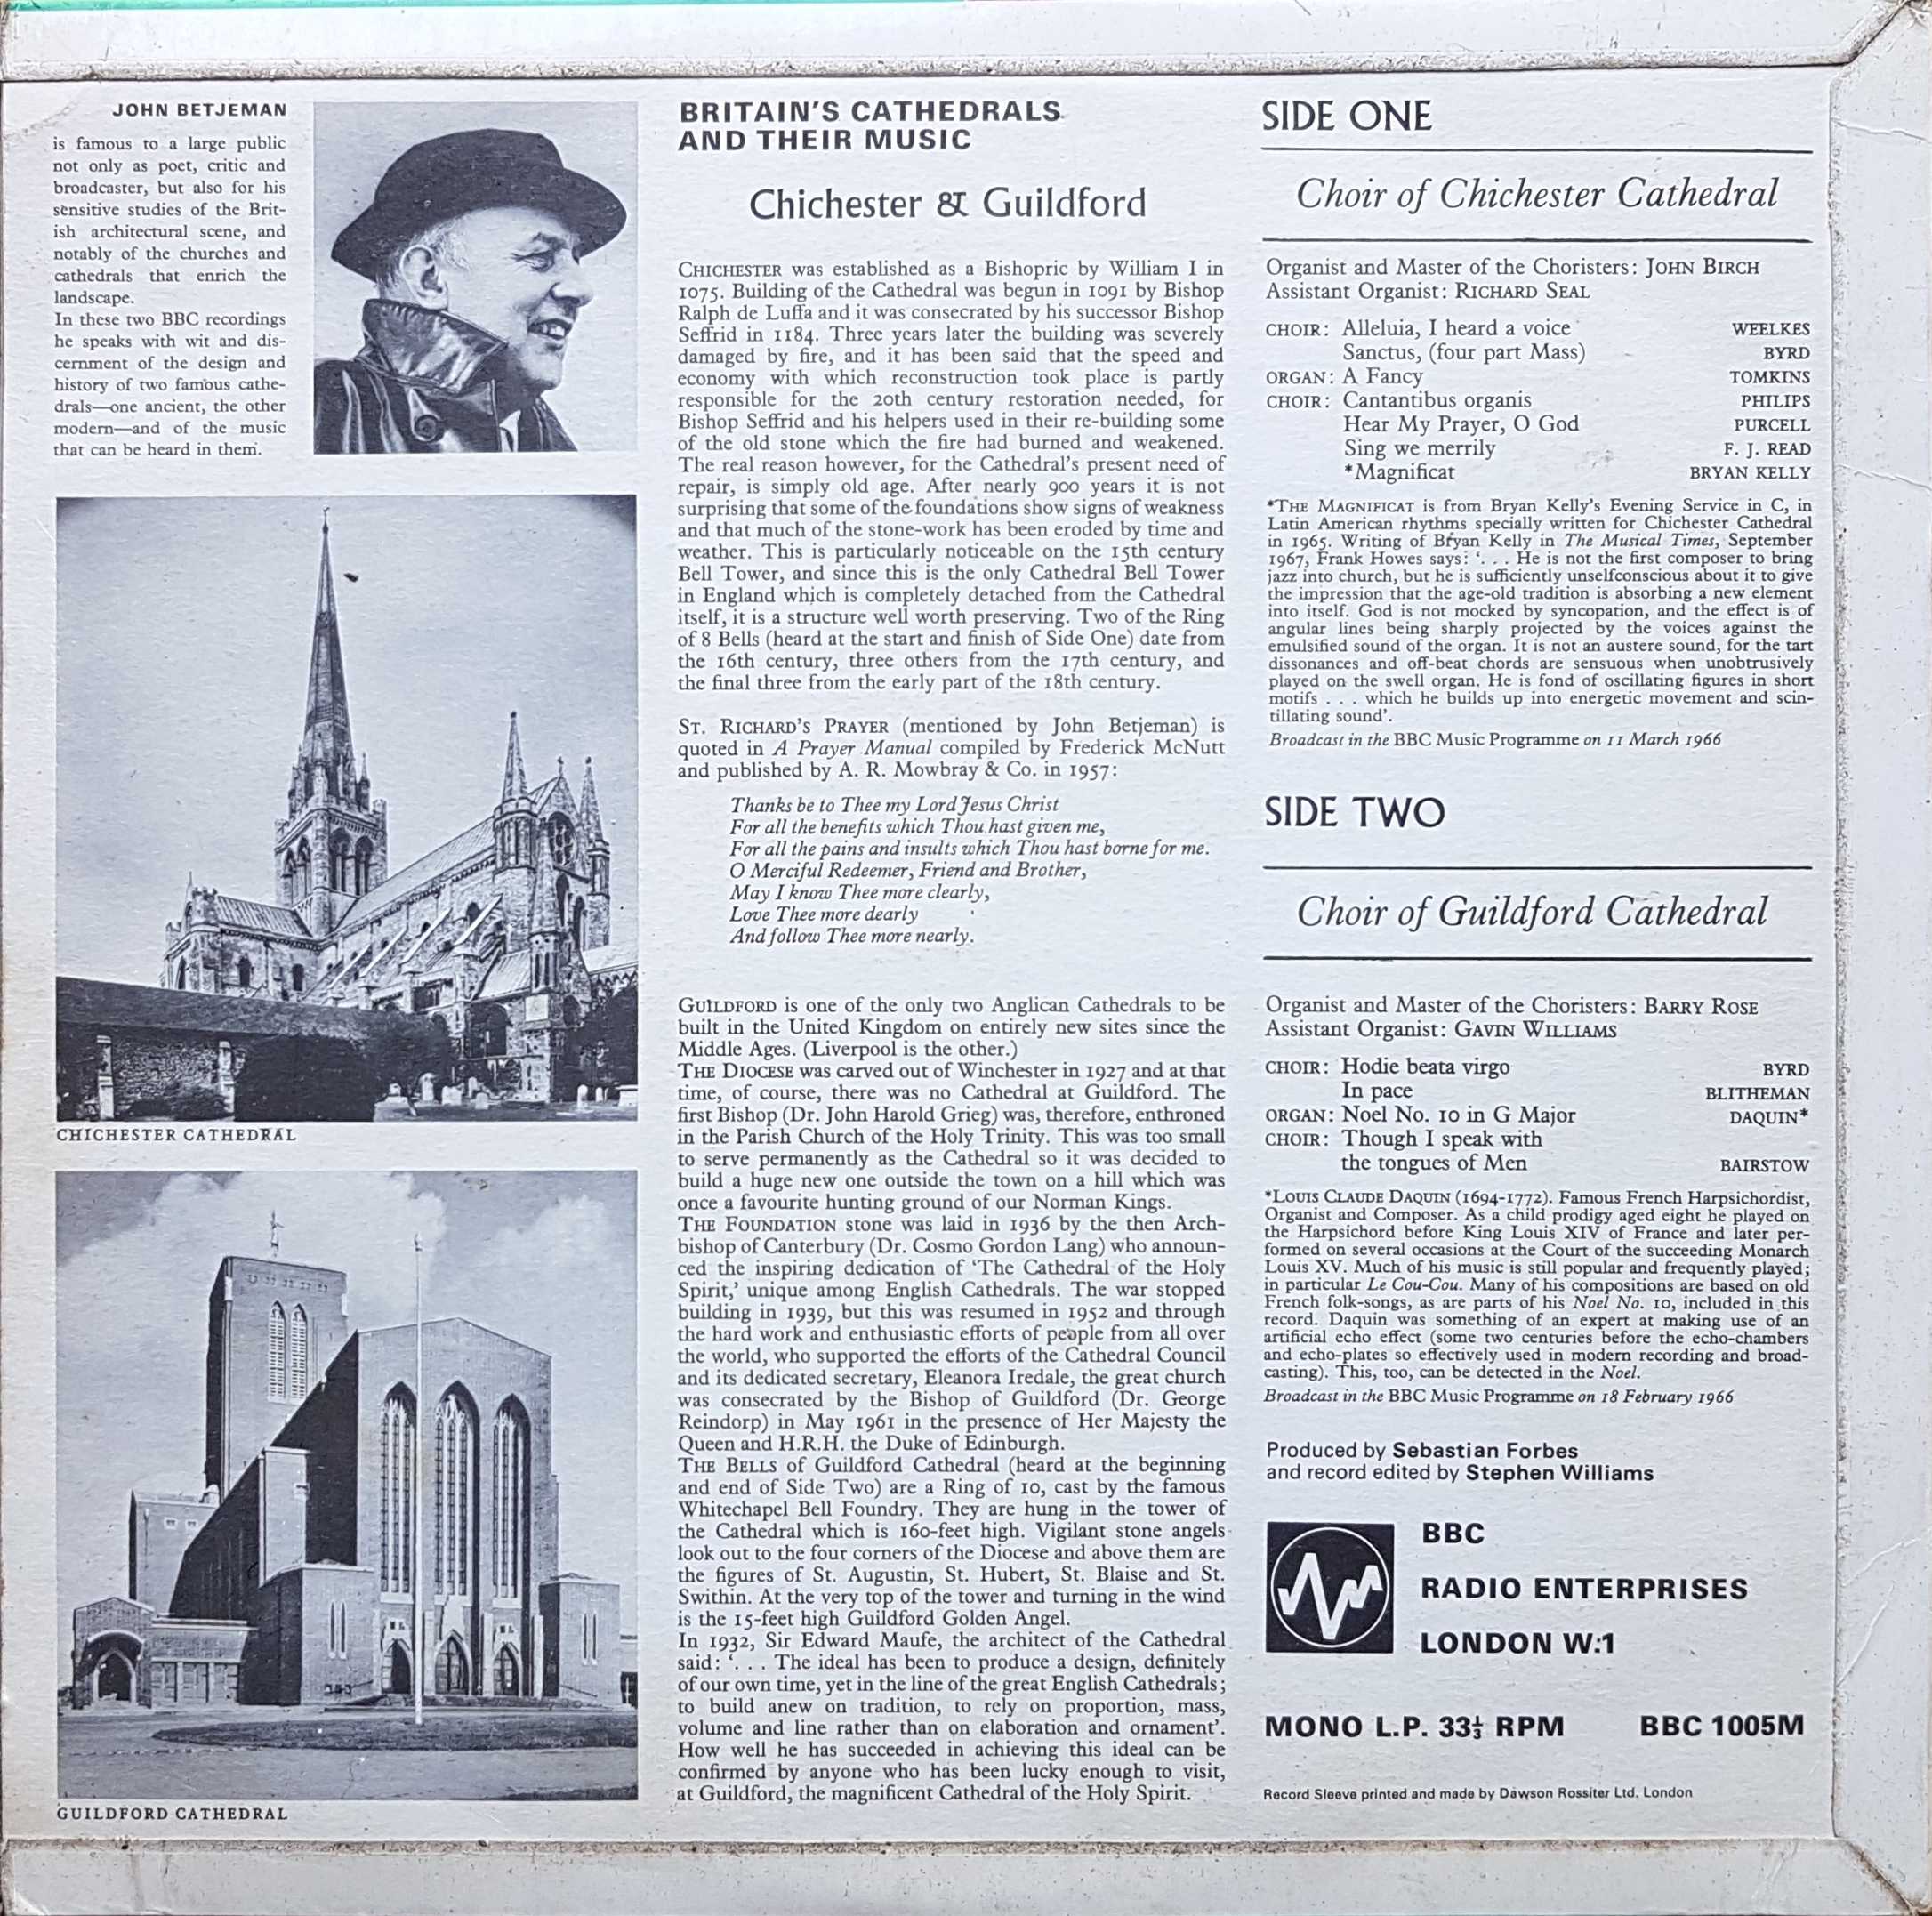 Picture of BBC 1005 Britain's cathedrals and their music by artist John Betjeman from the BBC records and Tapes library